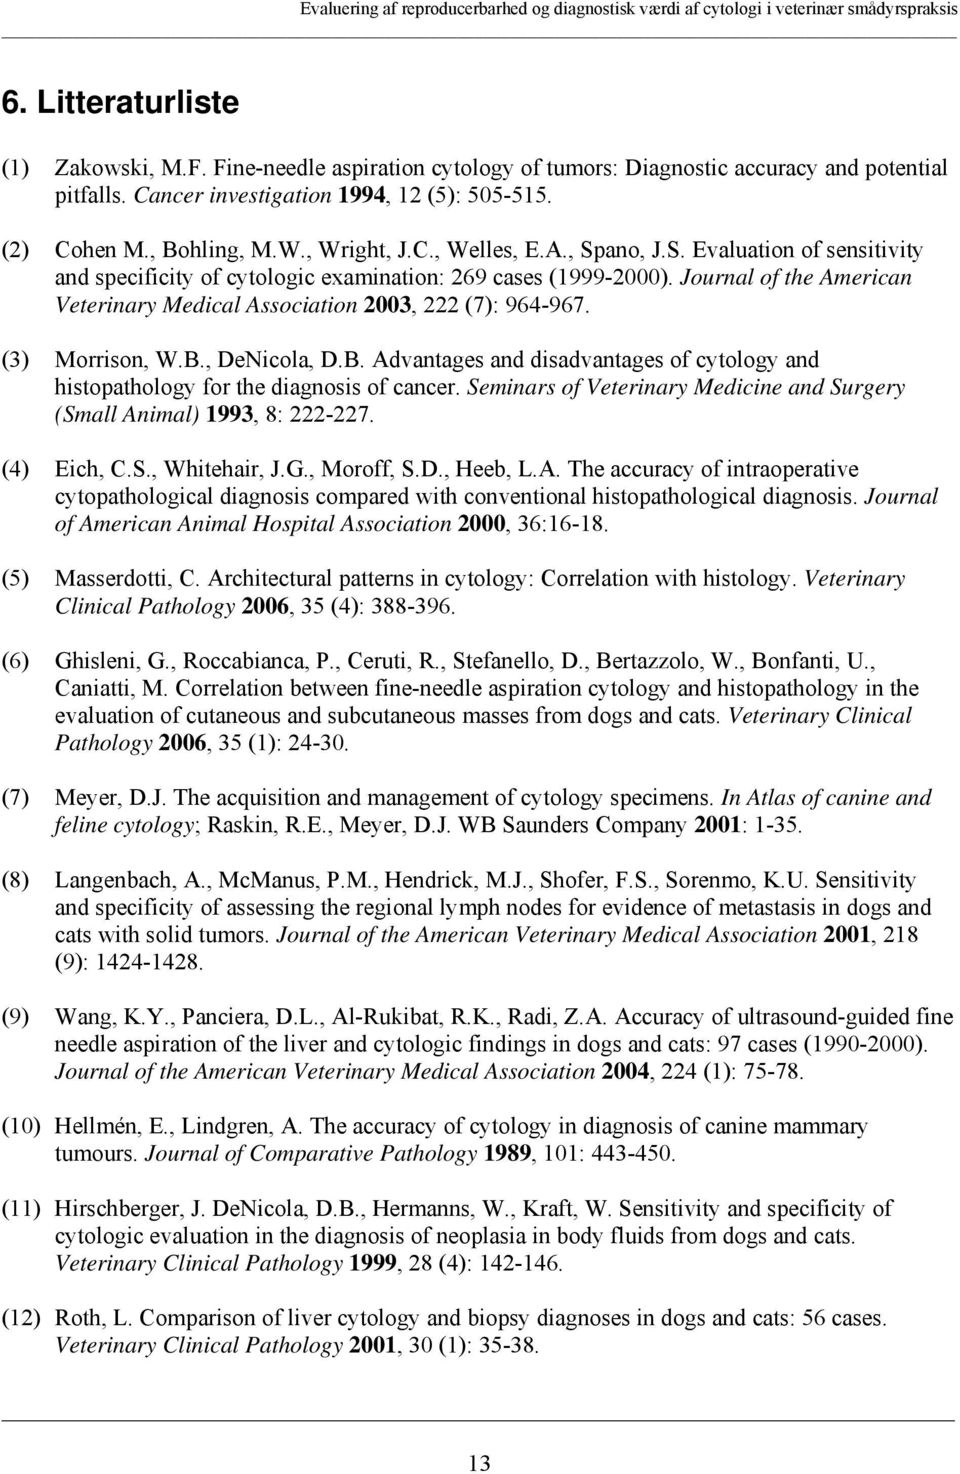 Journal of the American Veterinary Medical Association 2003, 222 (7): 964-967. (3) Morrison, W.B., DeNicola, D.B. Advantages and disadvantages of cytology and histopathology for the diagnosis of cancer.